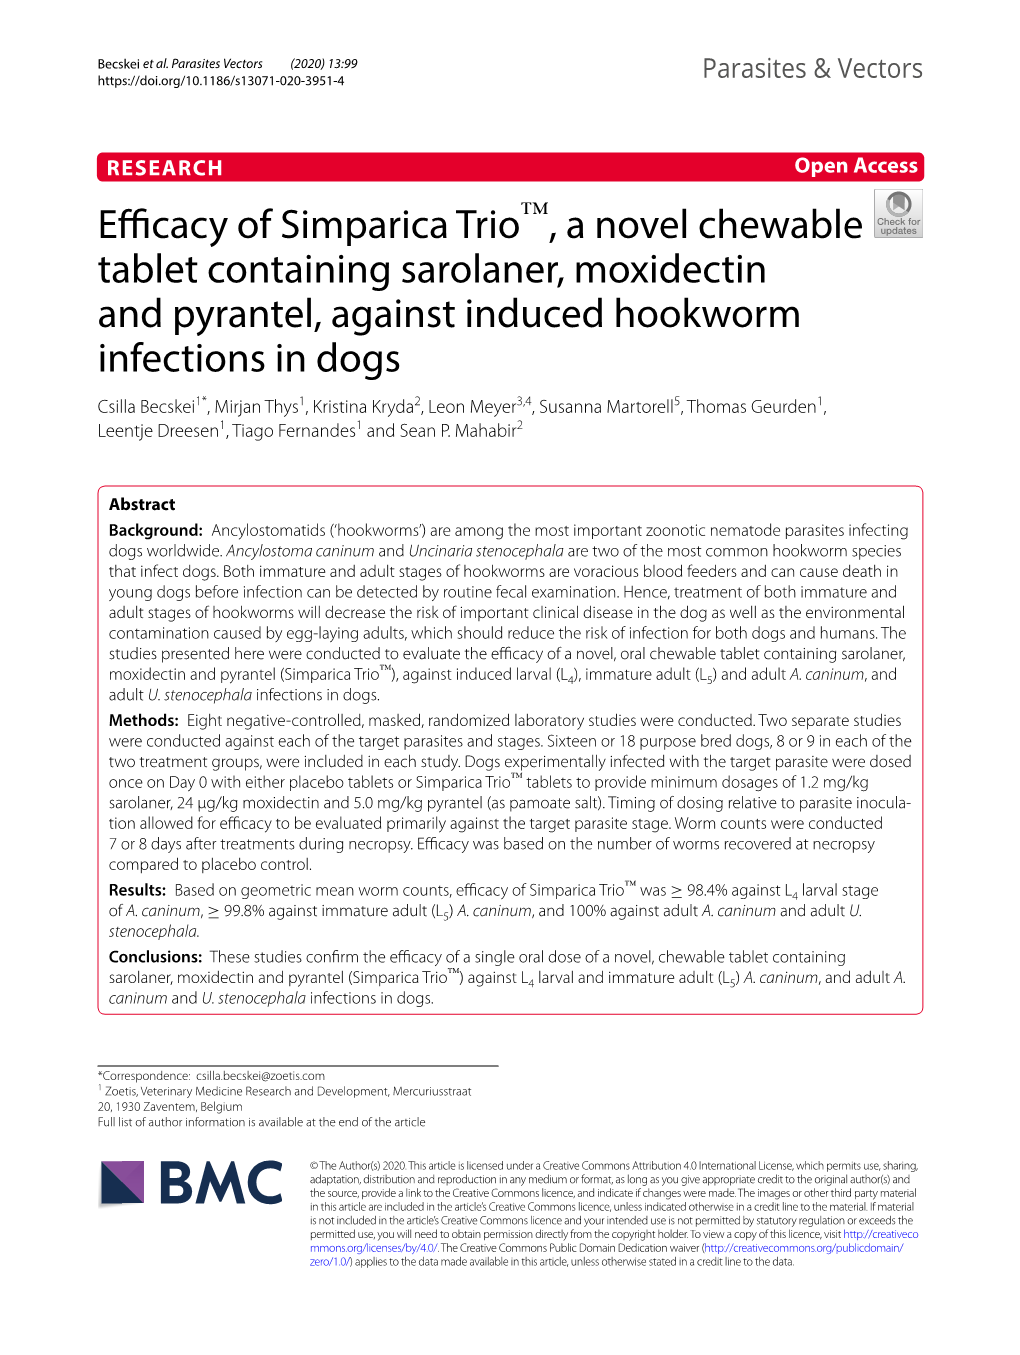 Efficacy of Simparica Trio™, a Novel Chewable Tablet Containing